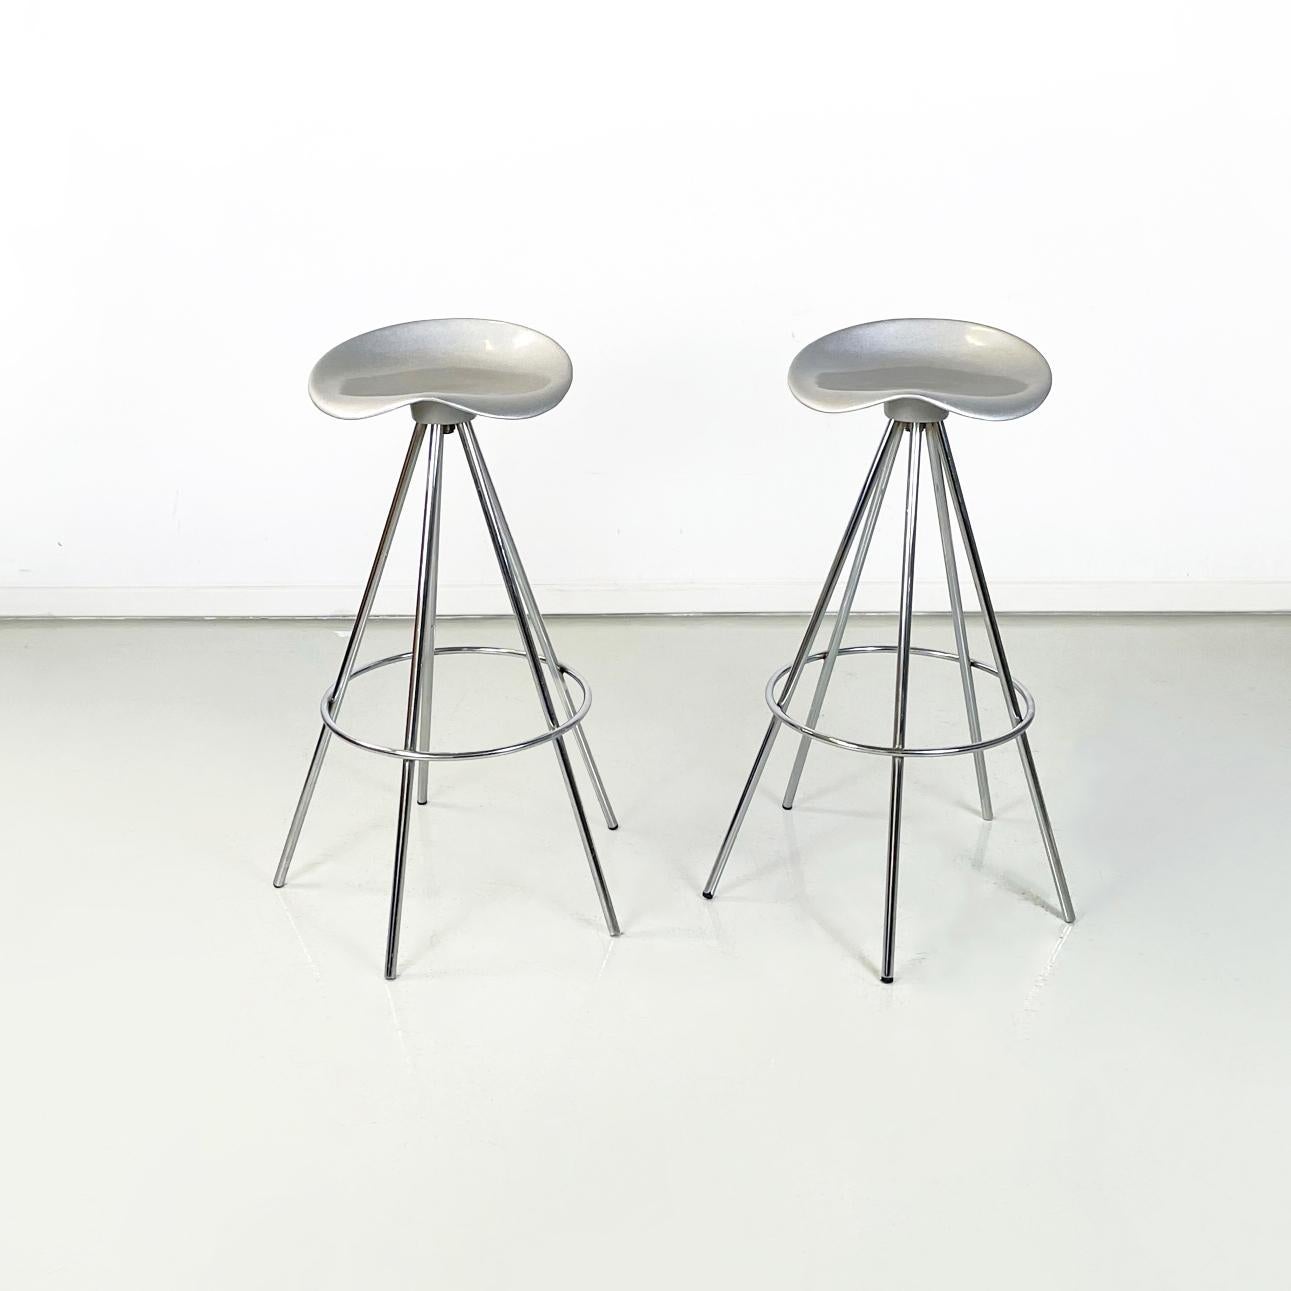 Spanish post-modern High bar stools Jamaica by Pepe Cortés for BD Barcellona, 2000s
Pair of high bar stools mod. Jamaica with a round base, entirely in metal. The seat is swivel. The legs are made of aluminium rod, joined by a rod circle.
Produced